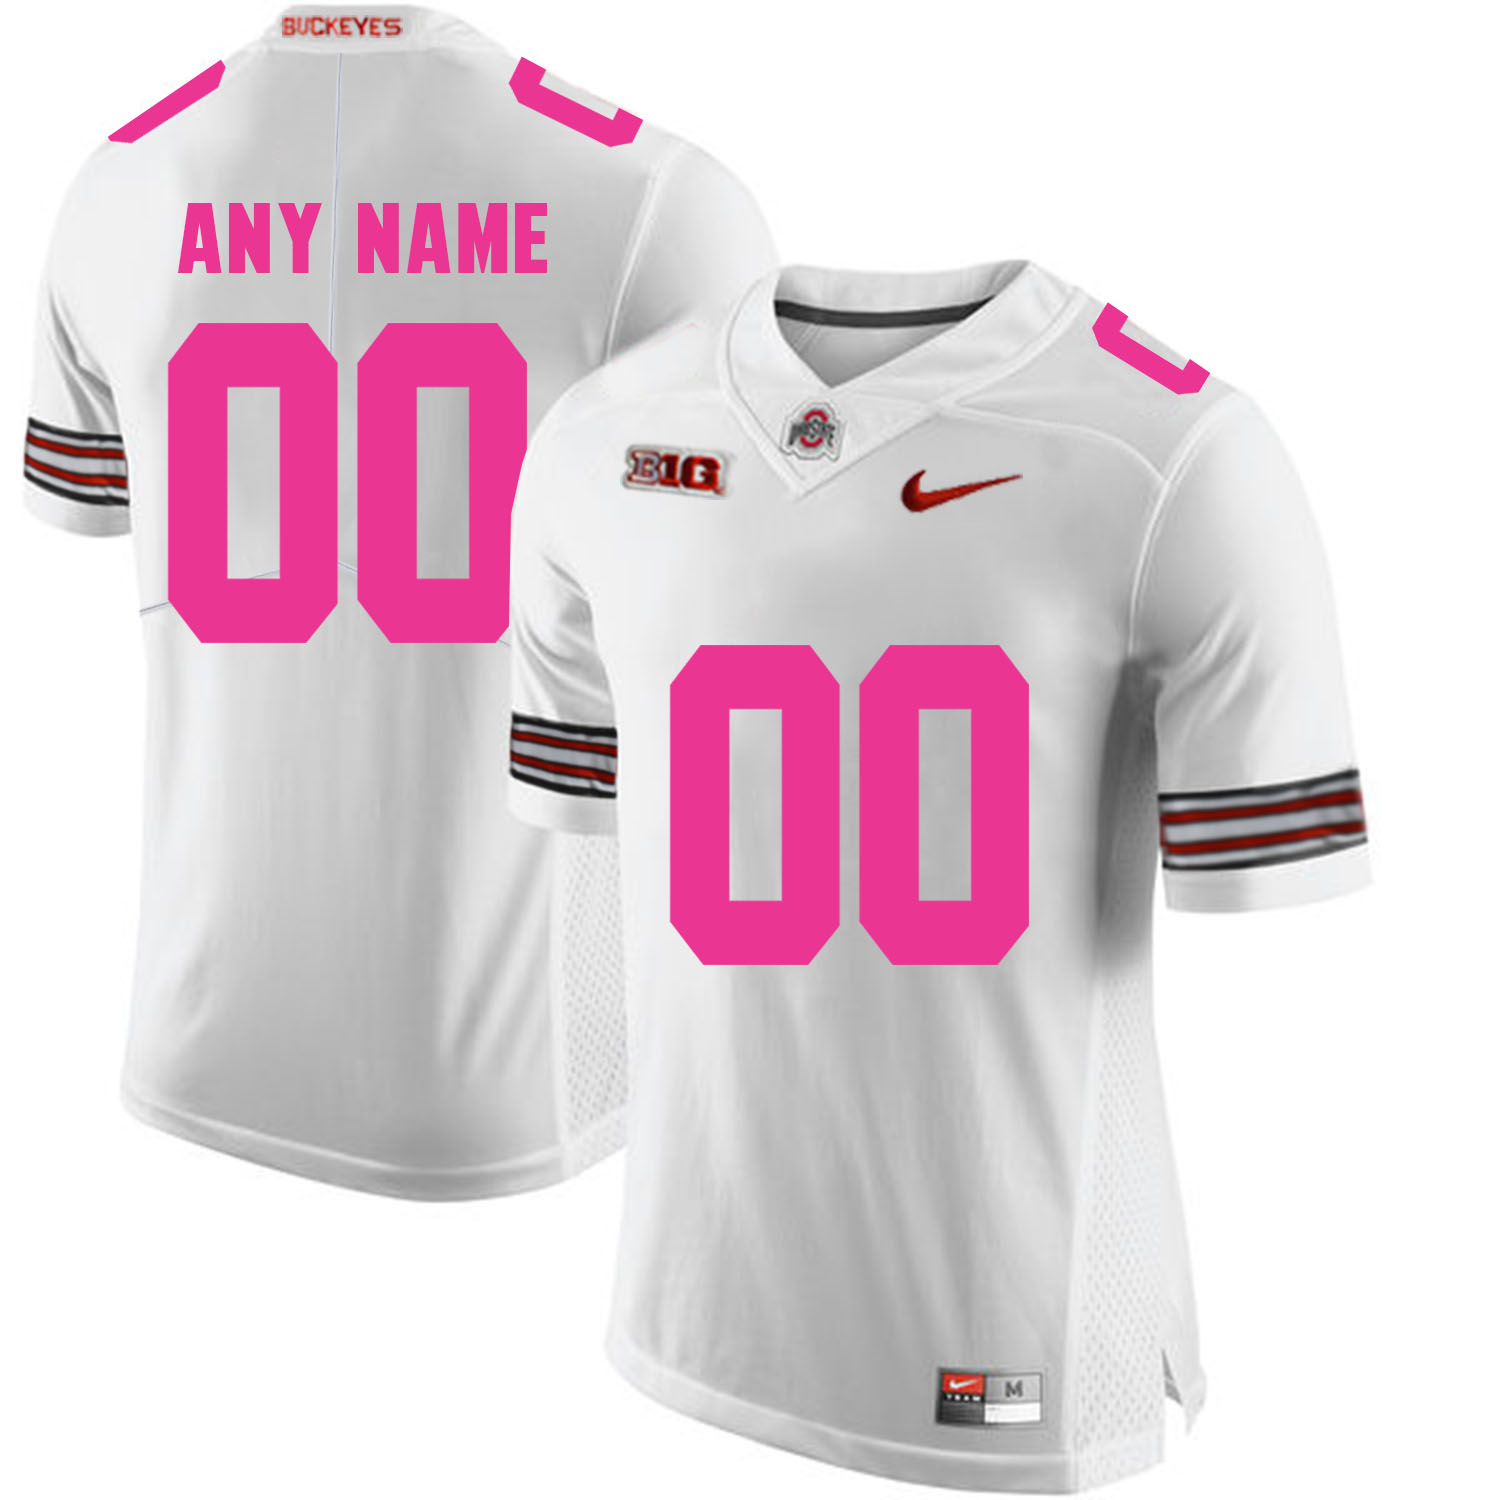 Ohio State Buckeyes White Men's Customized 2018 Breast Cancer Awareness College Football Jersey